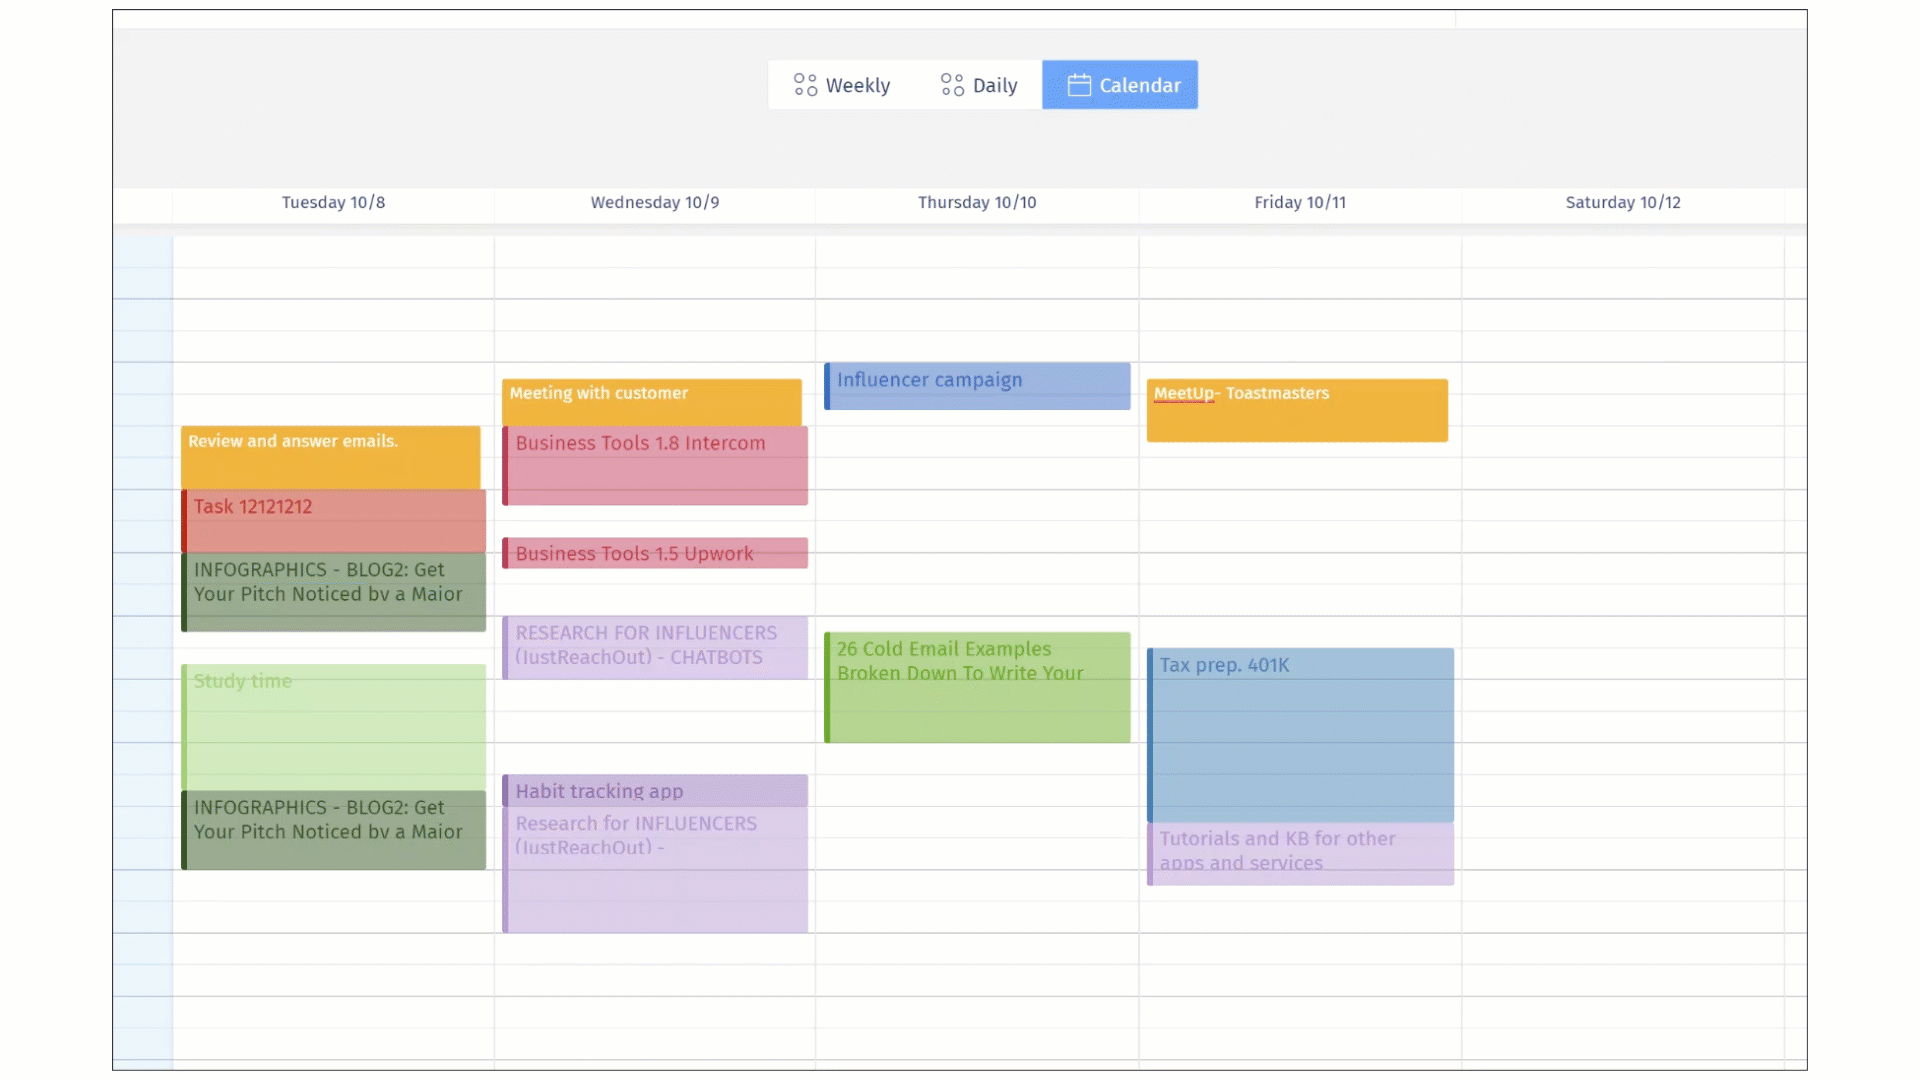 Schedule_move.gif